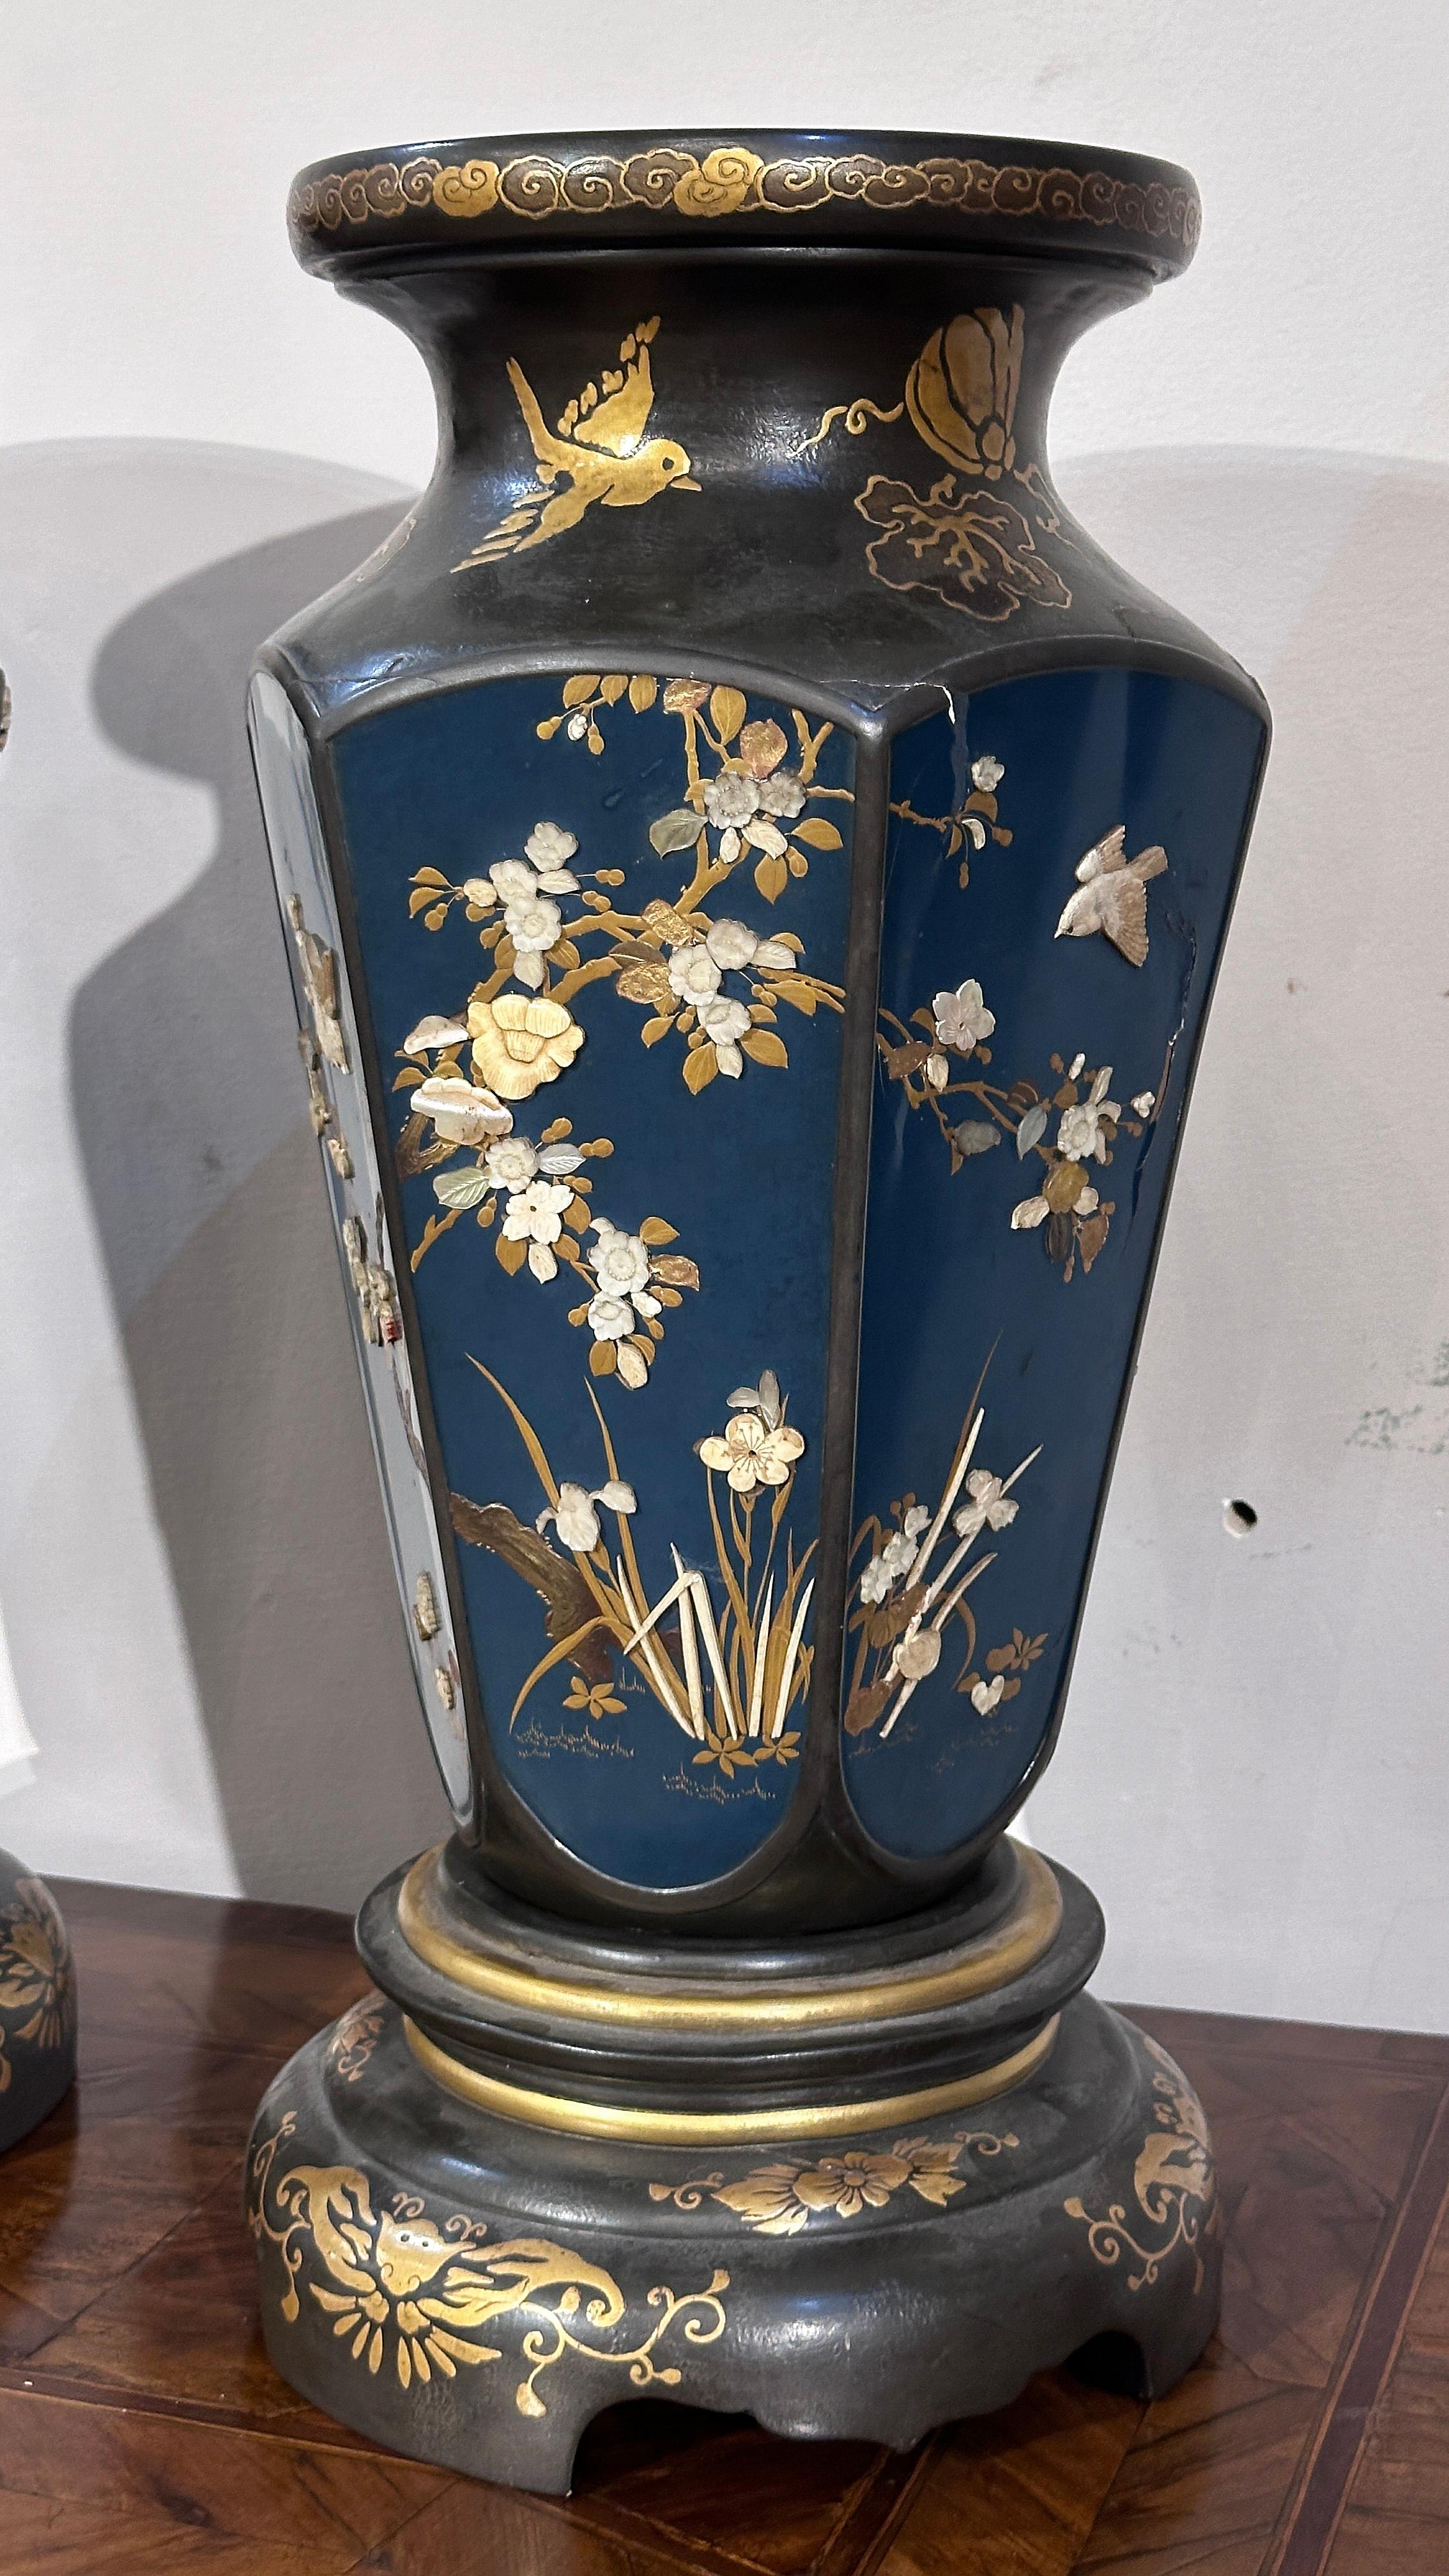 END OF THE 19th CENTURY PAIR OF JAPANESE VASES For Sale 3